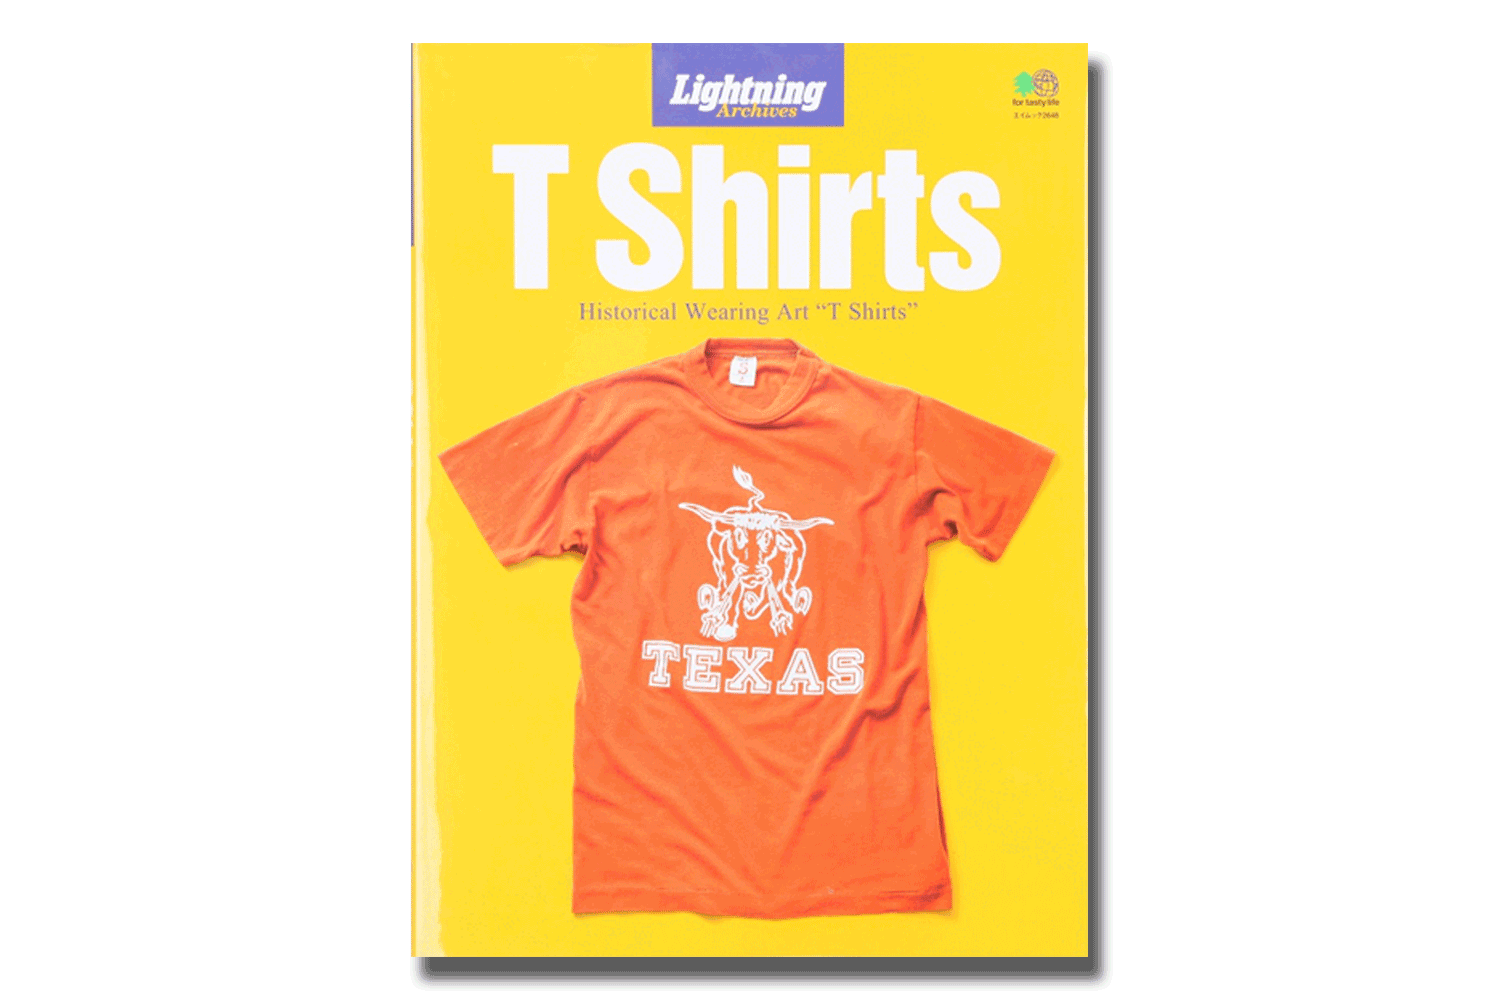 14 of Best Books About T-Shirts, Old and New | Everpress